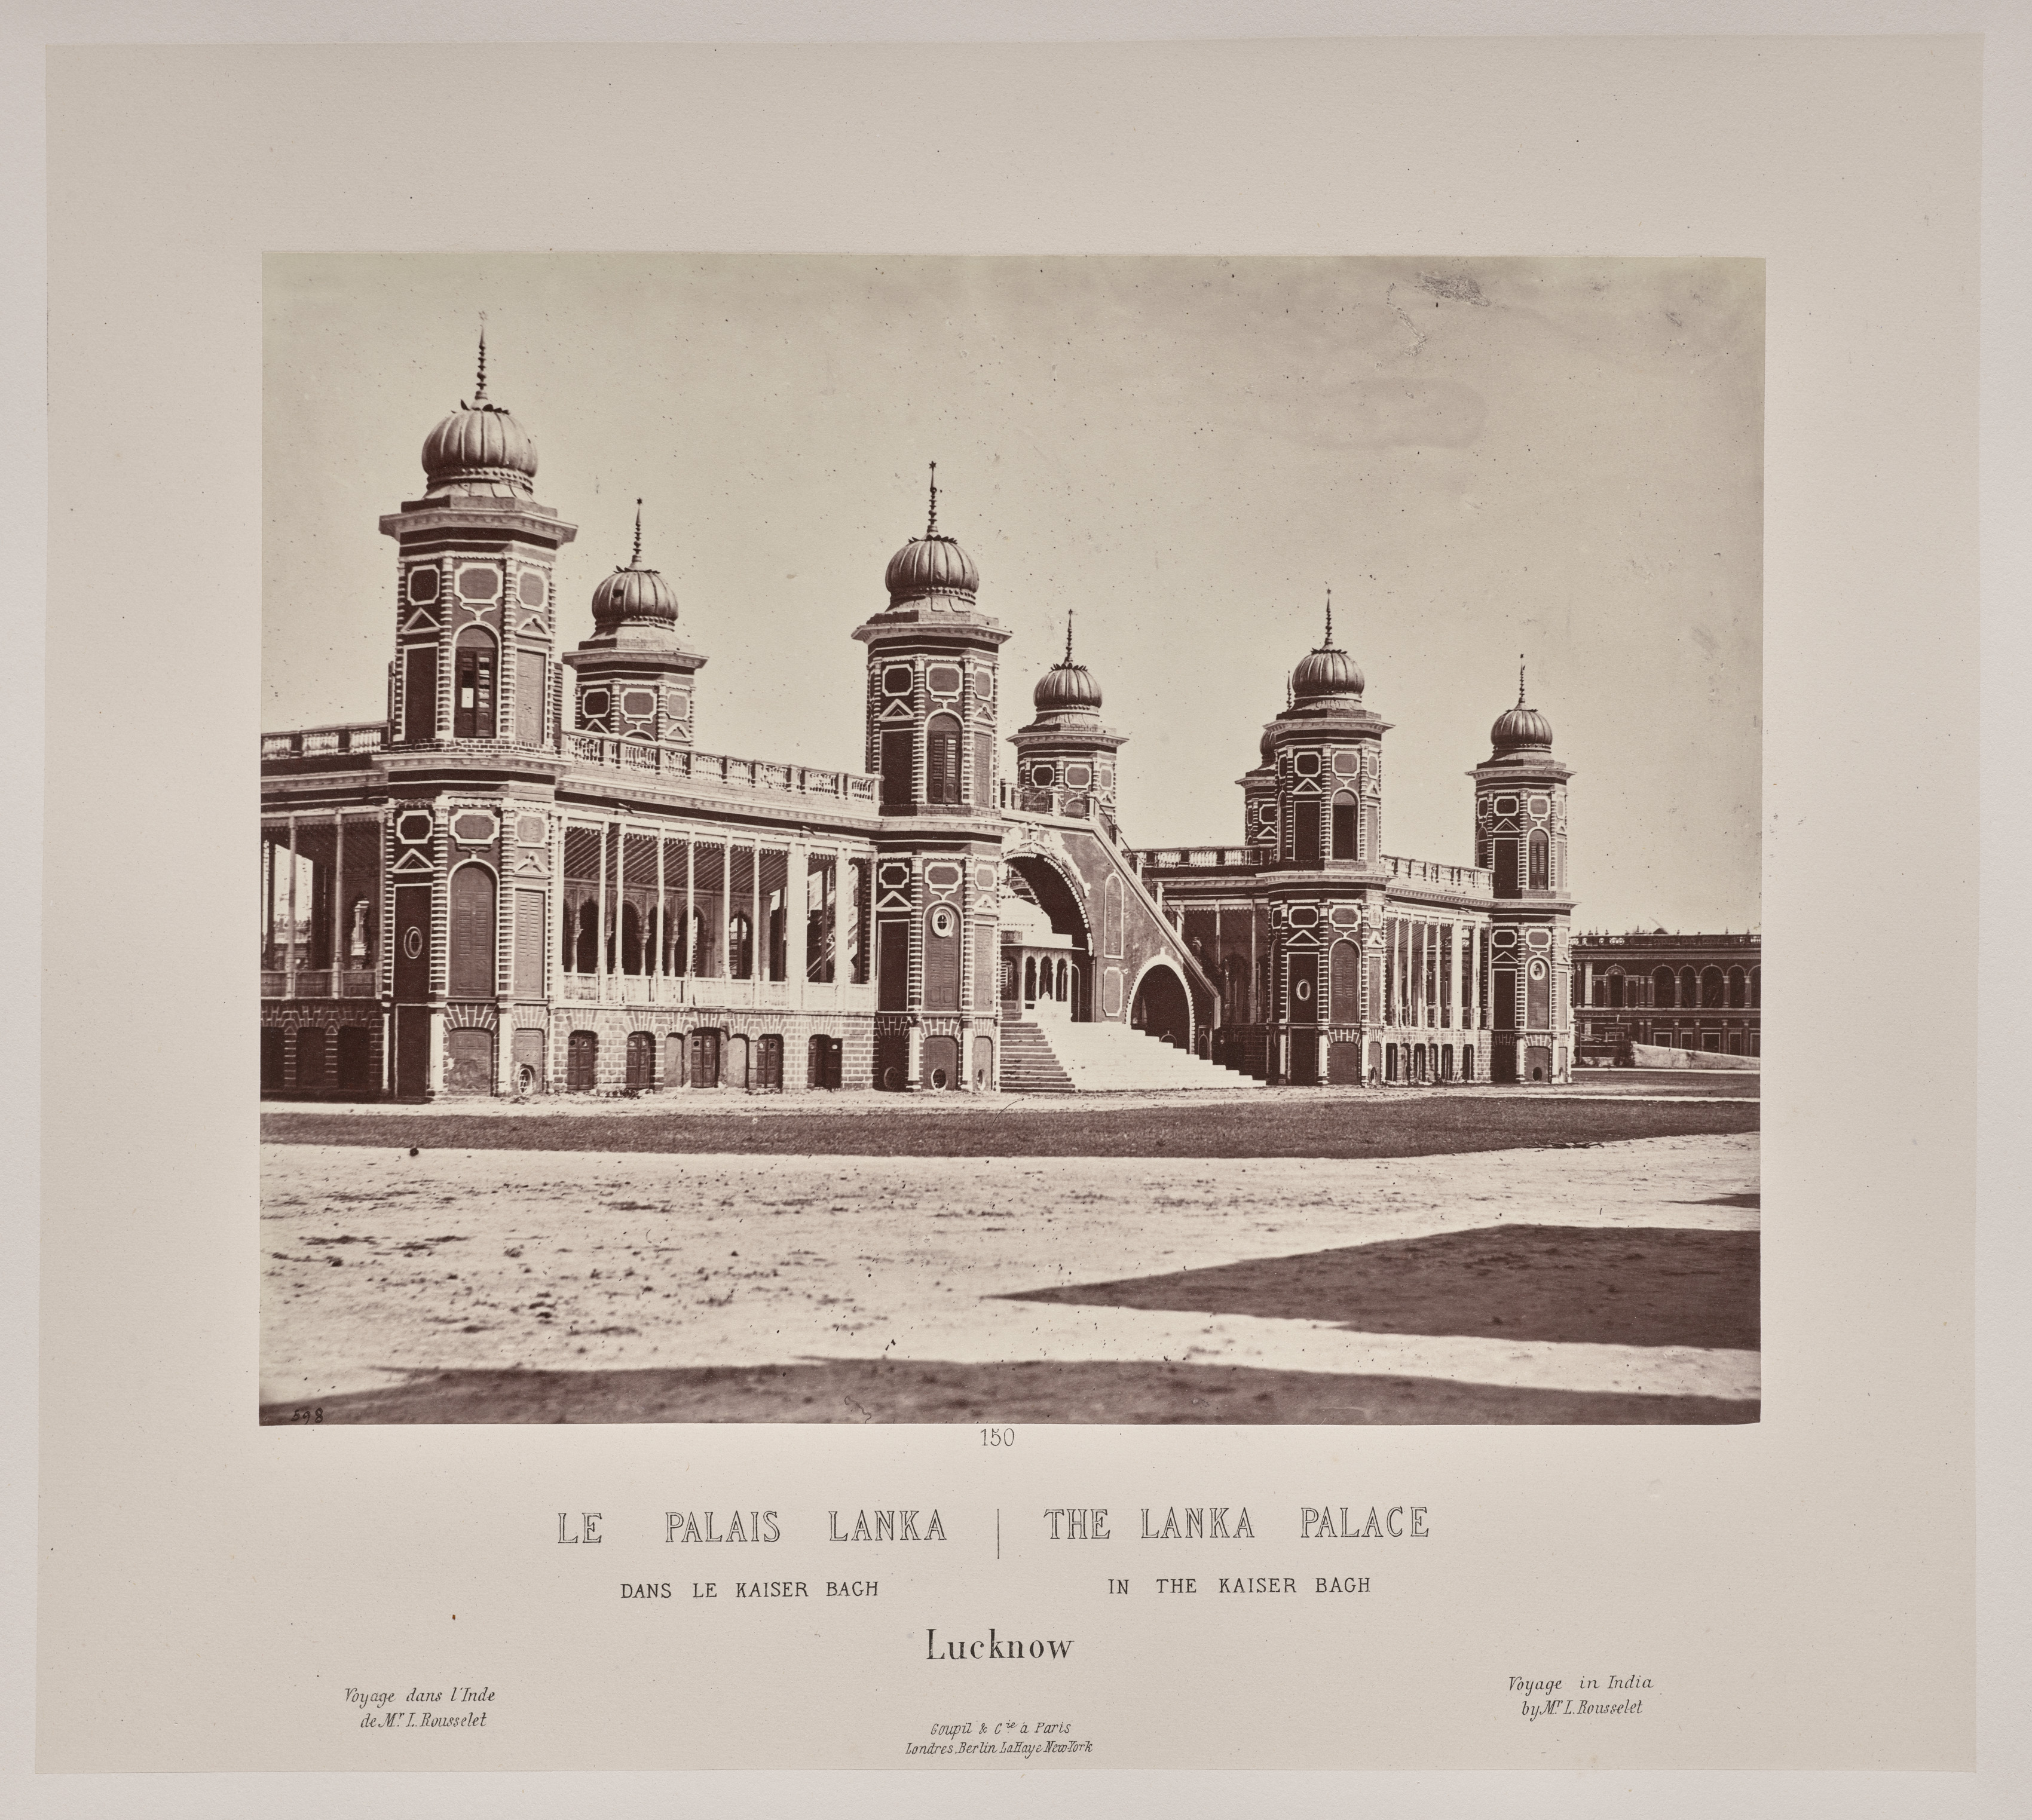 The Lanka Palace in the Kaiser Bach, Lucknow